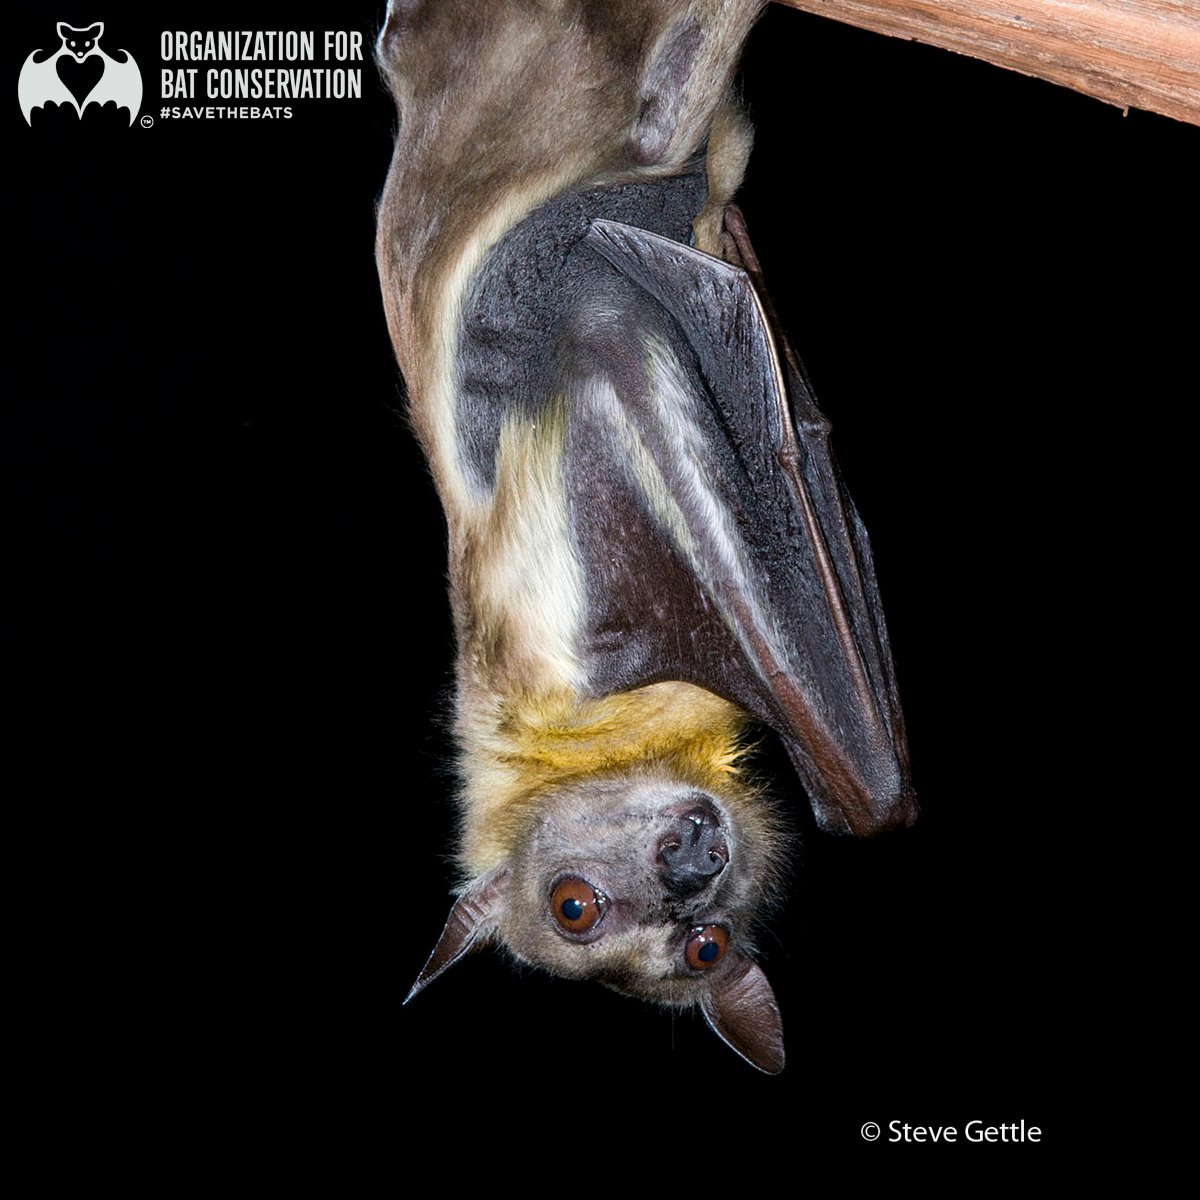 Time for a #BatFact! Did you know that the Straw-colored fruit bat is the second largest bat in Africa?! #SavetheBats